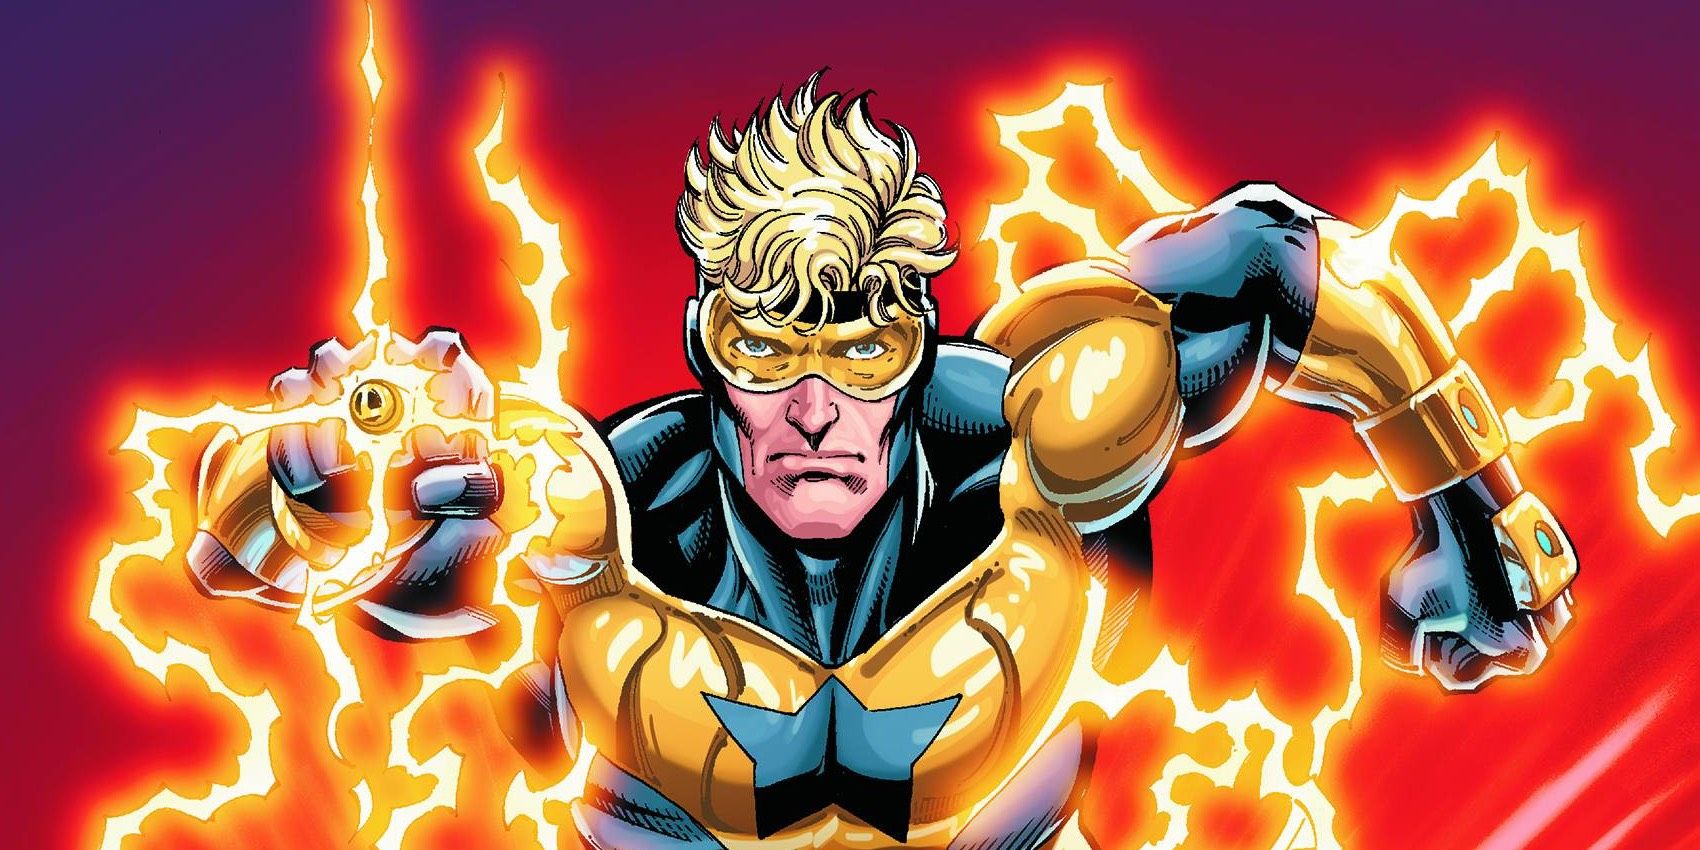 Booster Gold in DC Comics Flashpoint